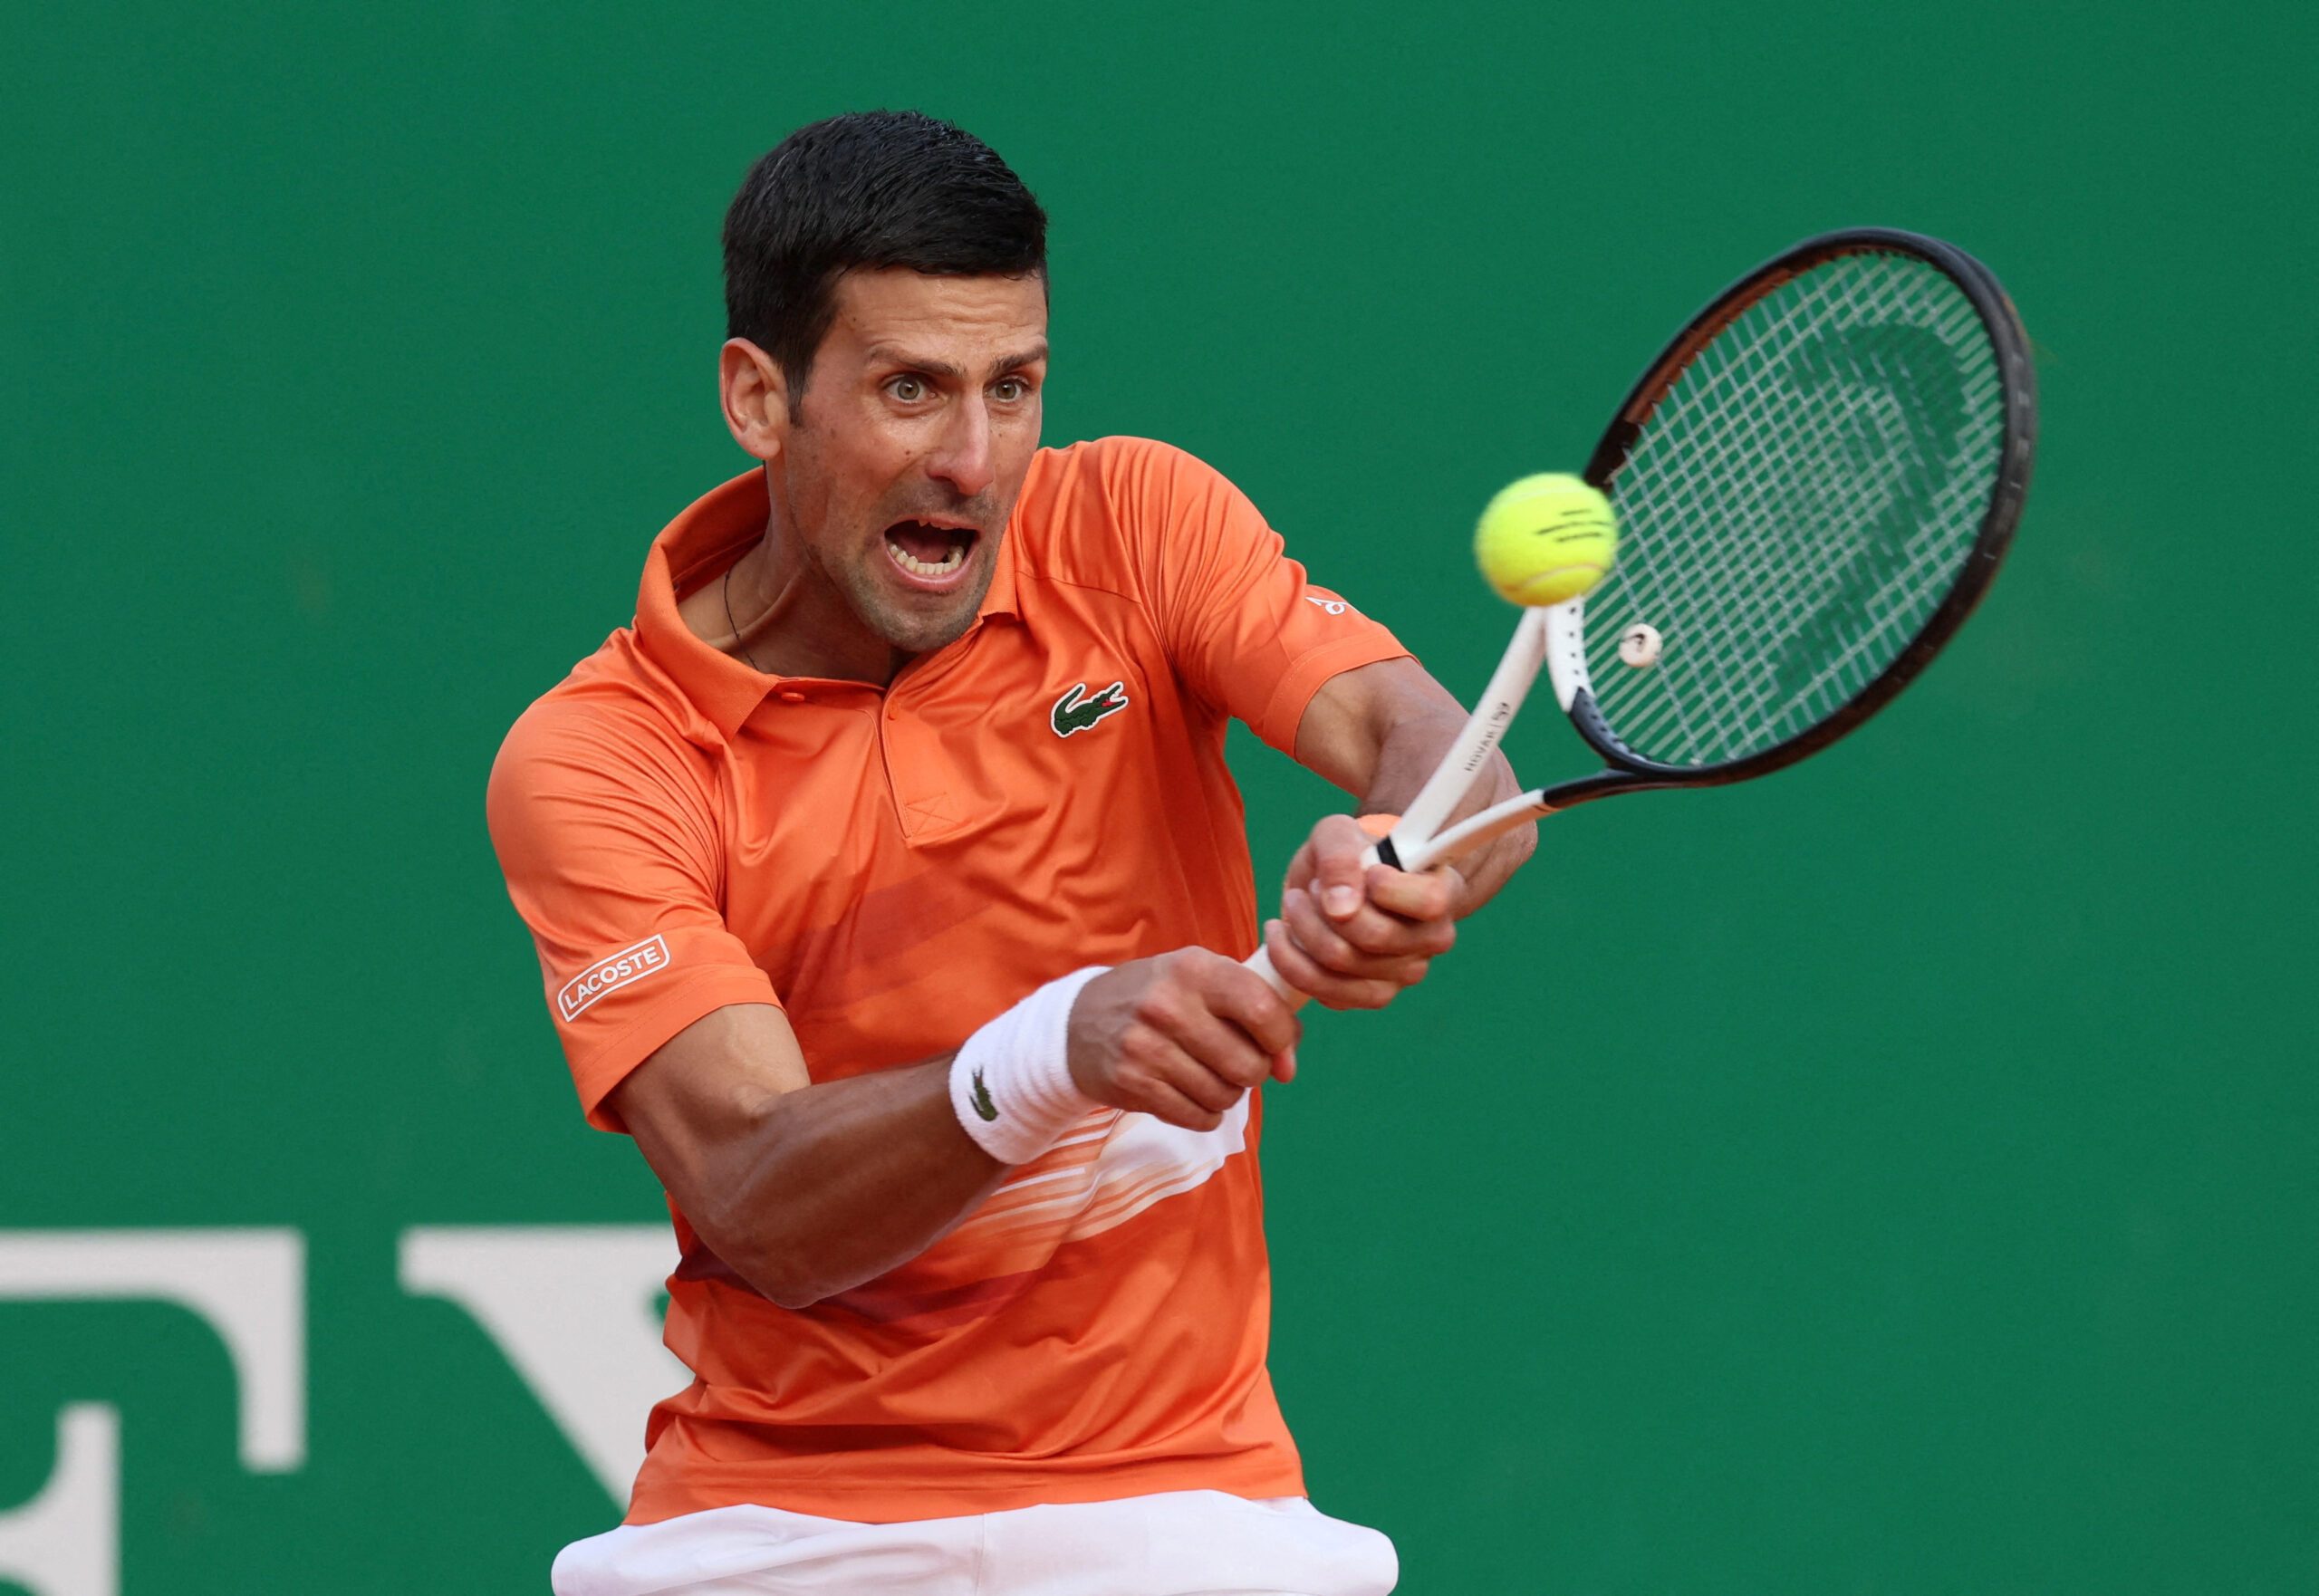 Djokovic likely to miss US Open over COVID-19 vaccine status